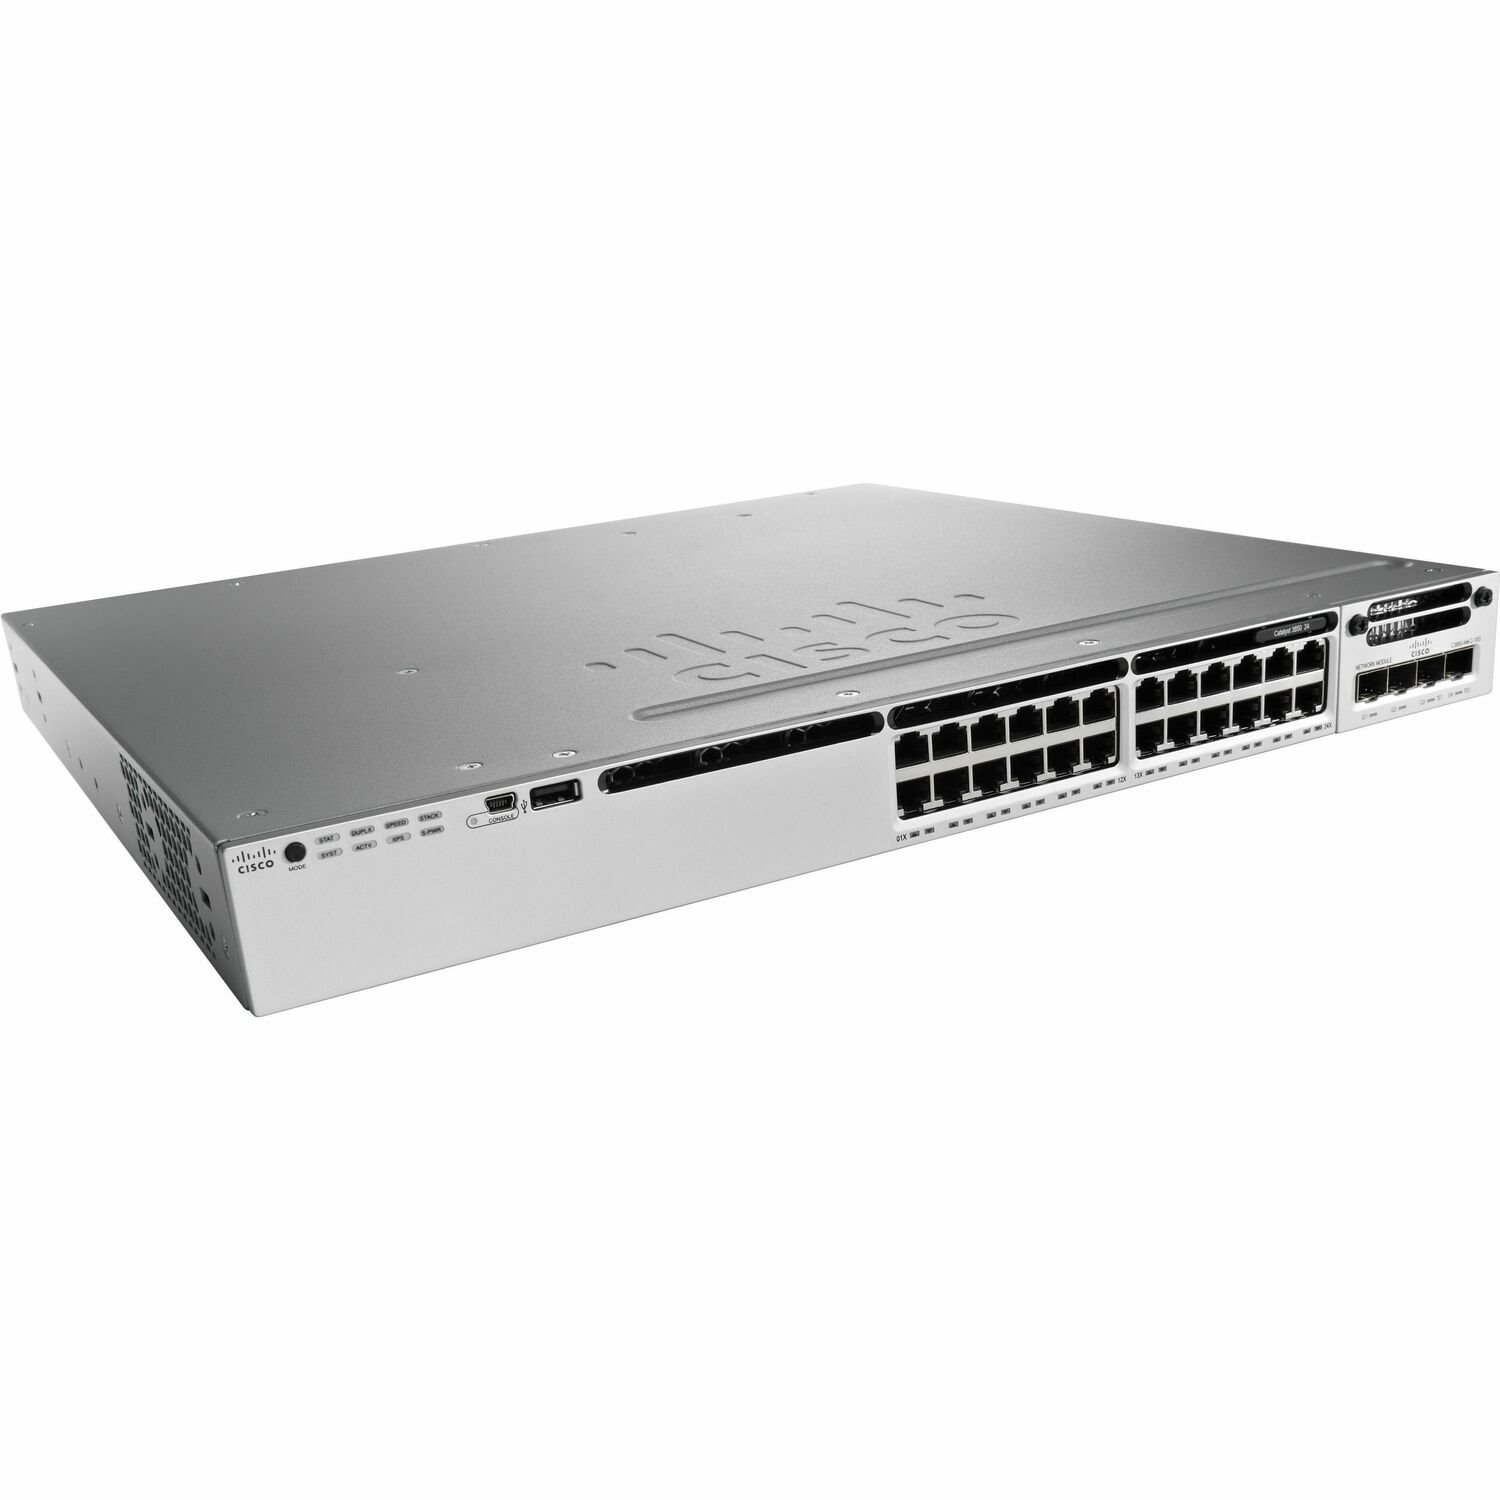 Cisco Catalyst WS-3850-24T Ethernet Switch